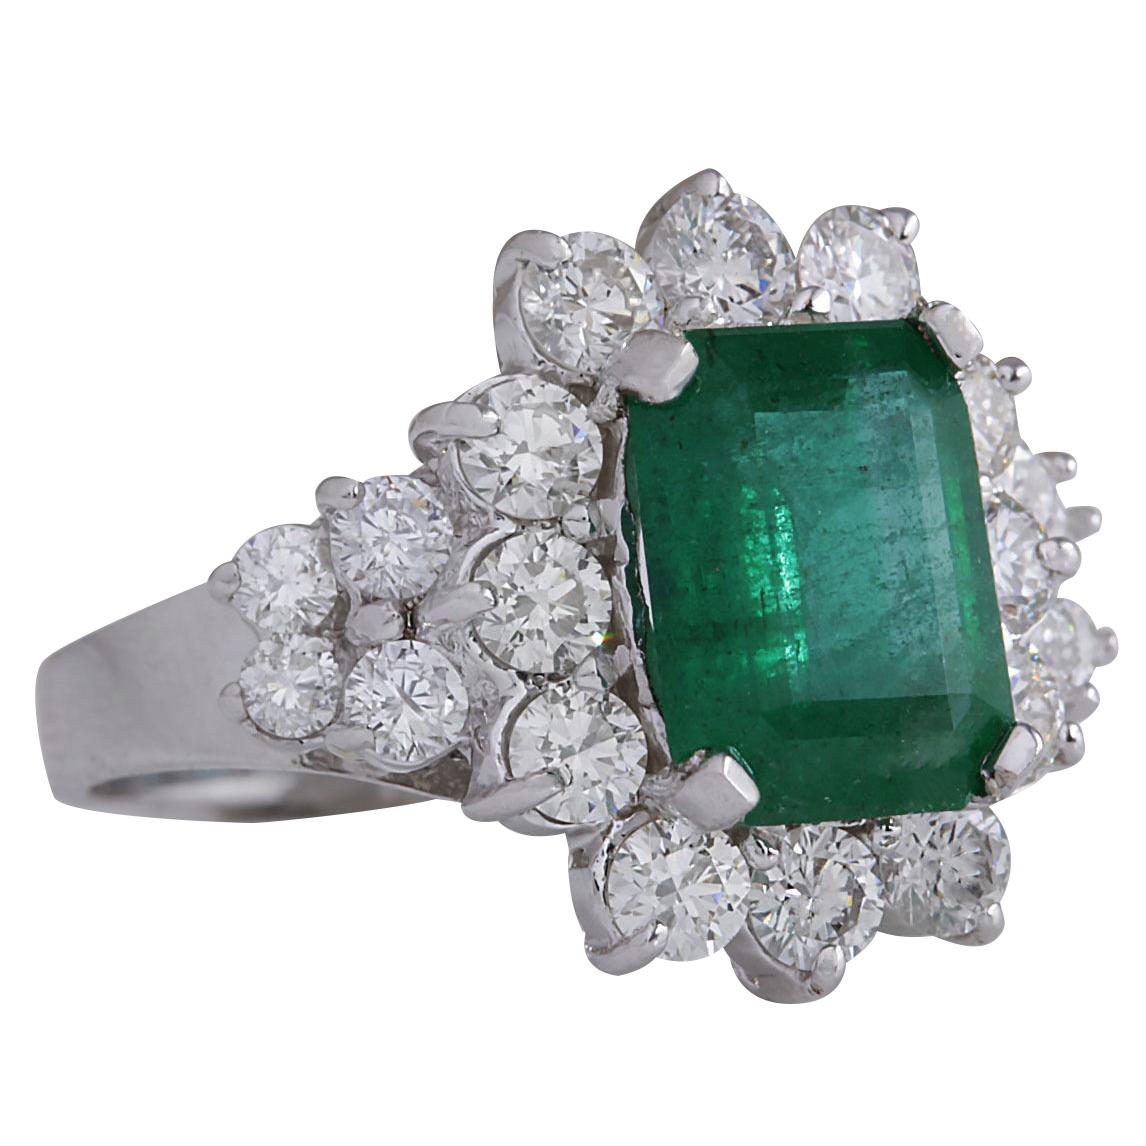 4.58 Carat Emerald 14 Karat White Gold Diamond Ring
Stamped: 14K White Gold
Total Ring Weight: 5.0 Grams
Total  Emerald Weight is 2.96 Carat (Measures: 10.00x8.00 mm)
Color: Green
Total  Diamond Weight is 1.62 Carat
Color: F-G, Clarity: VS2-SI1
Face